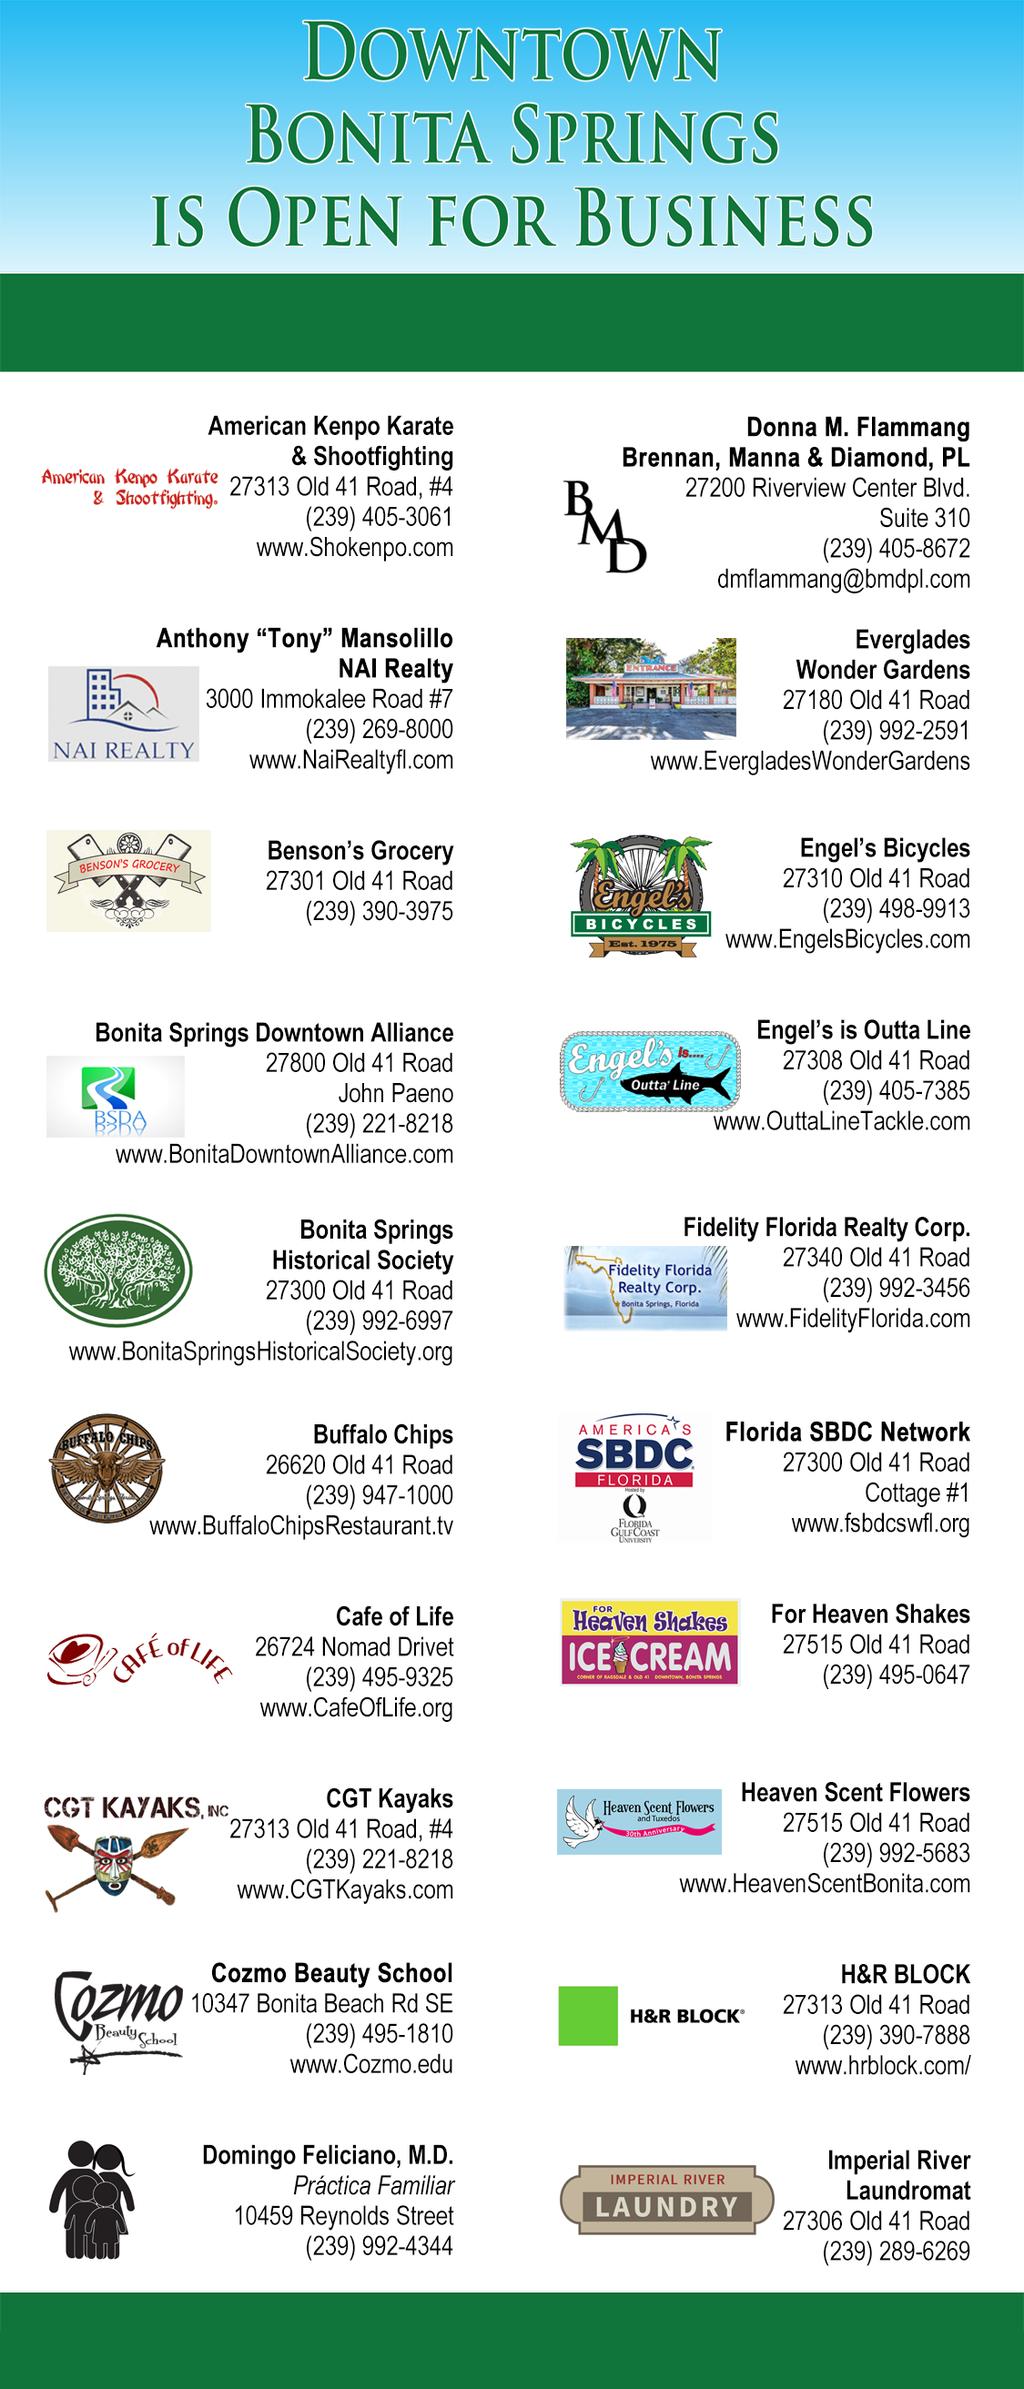 Thank you to all businesses that helped sponsor the Downtown Bonita Springs Brochure!